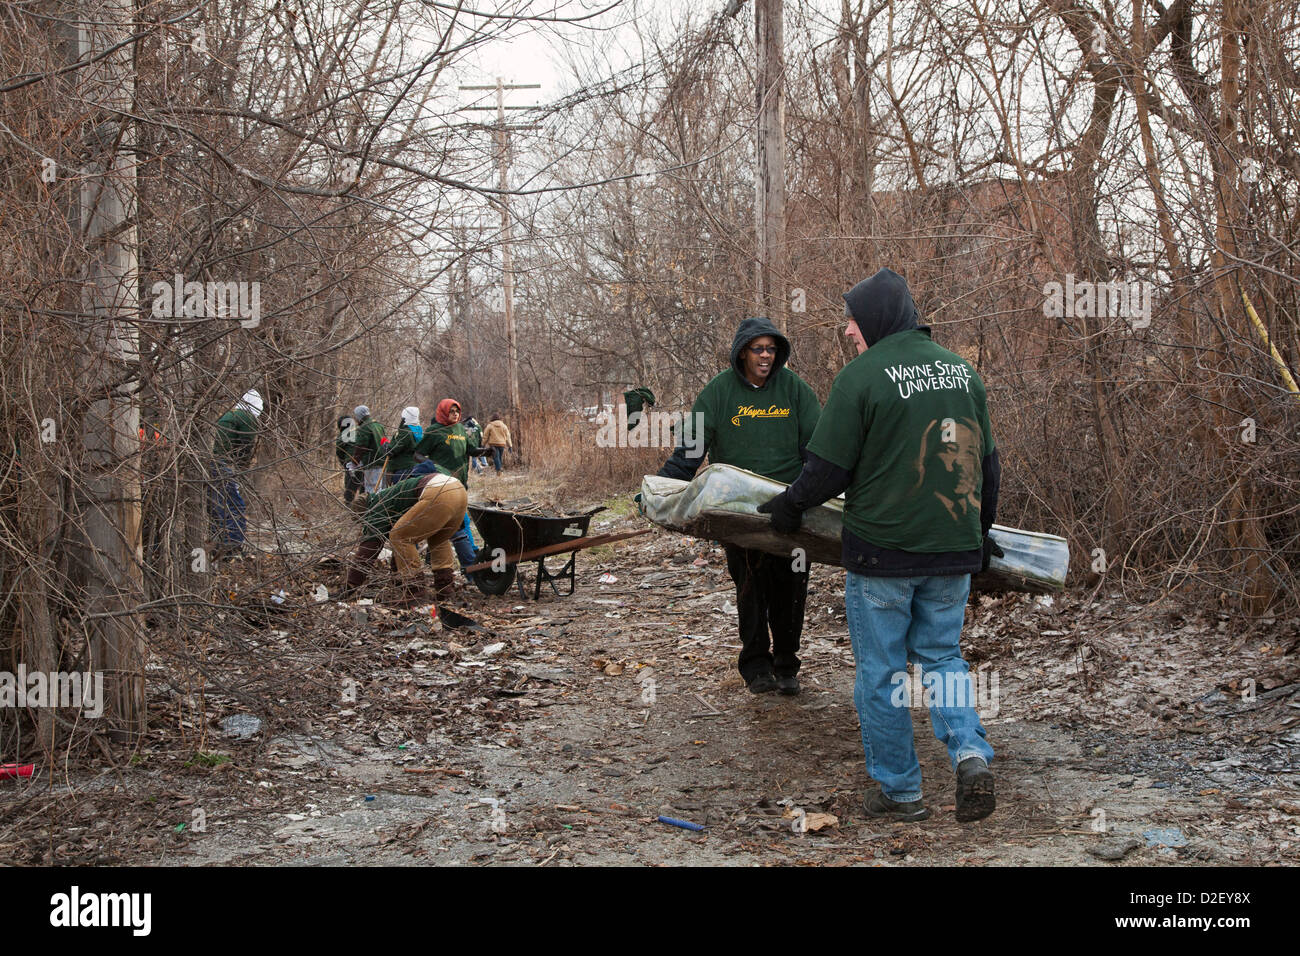 On Martin Luther King Day, college students and neighborhood residents volunteered to clean trash from vacant properties. Stock Photo